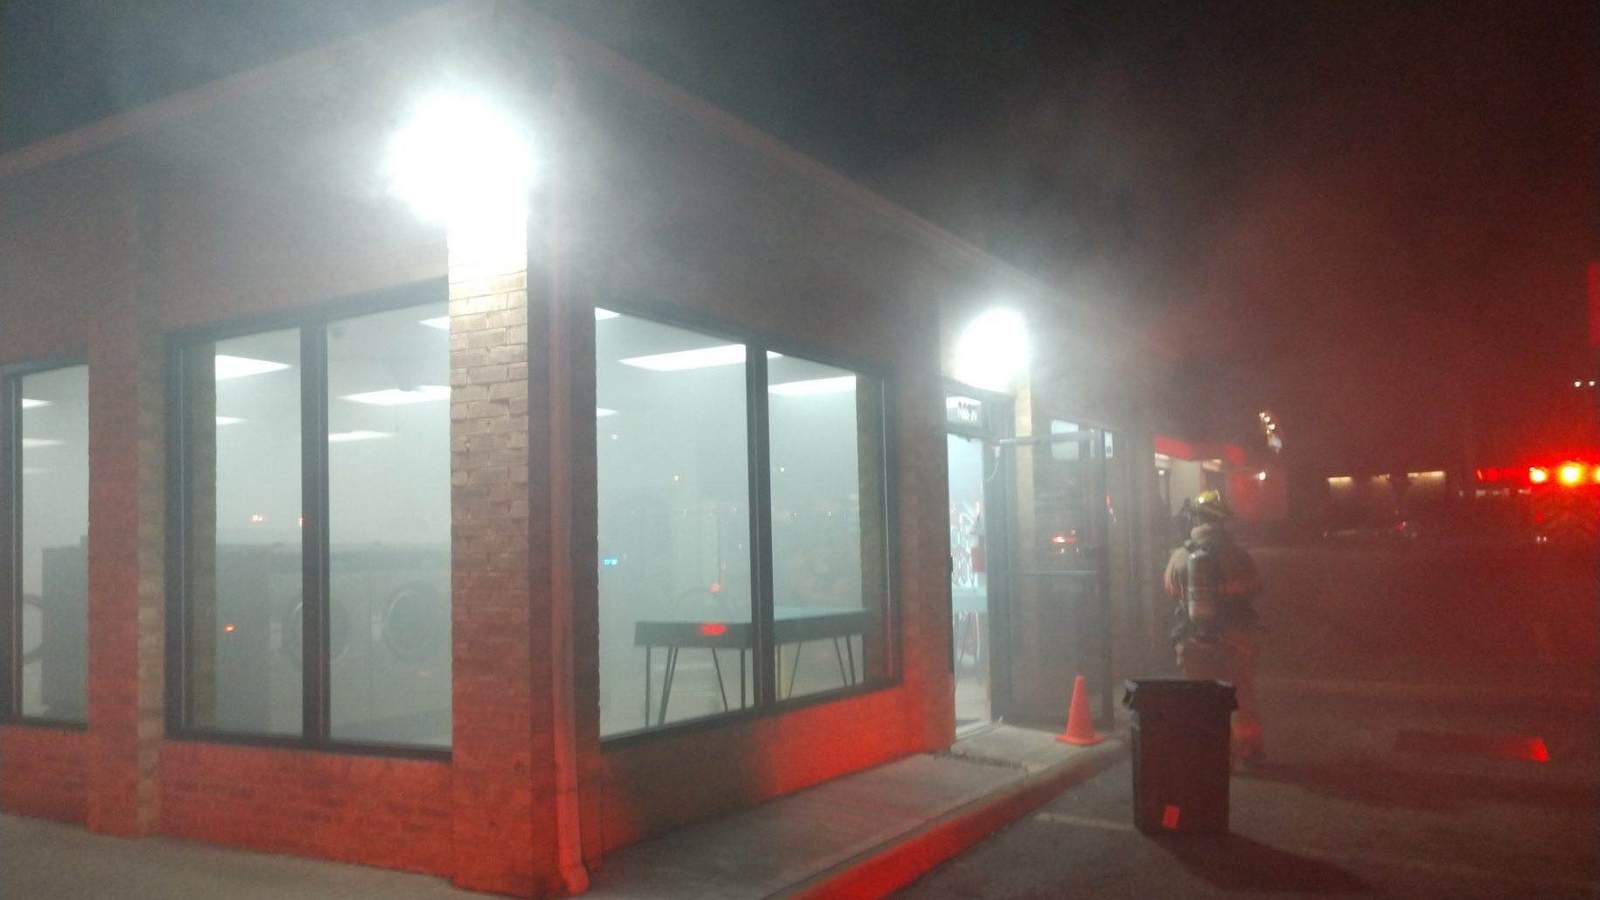 No one hurt after laundromat fire in Roanoke